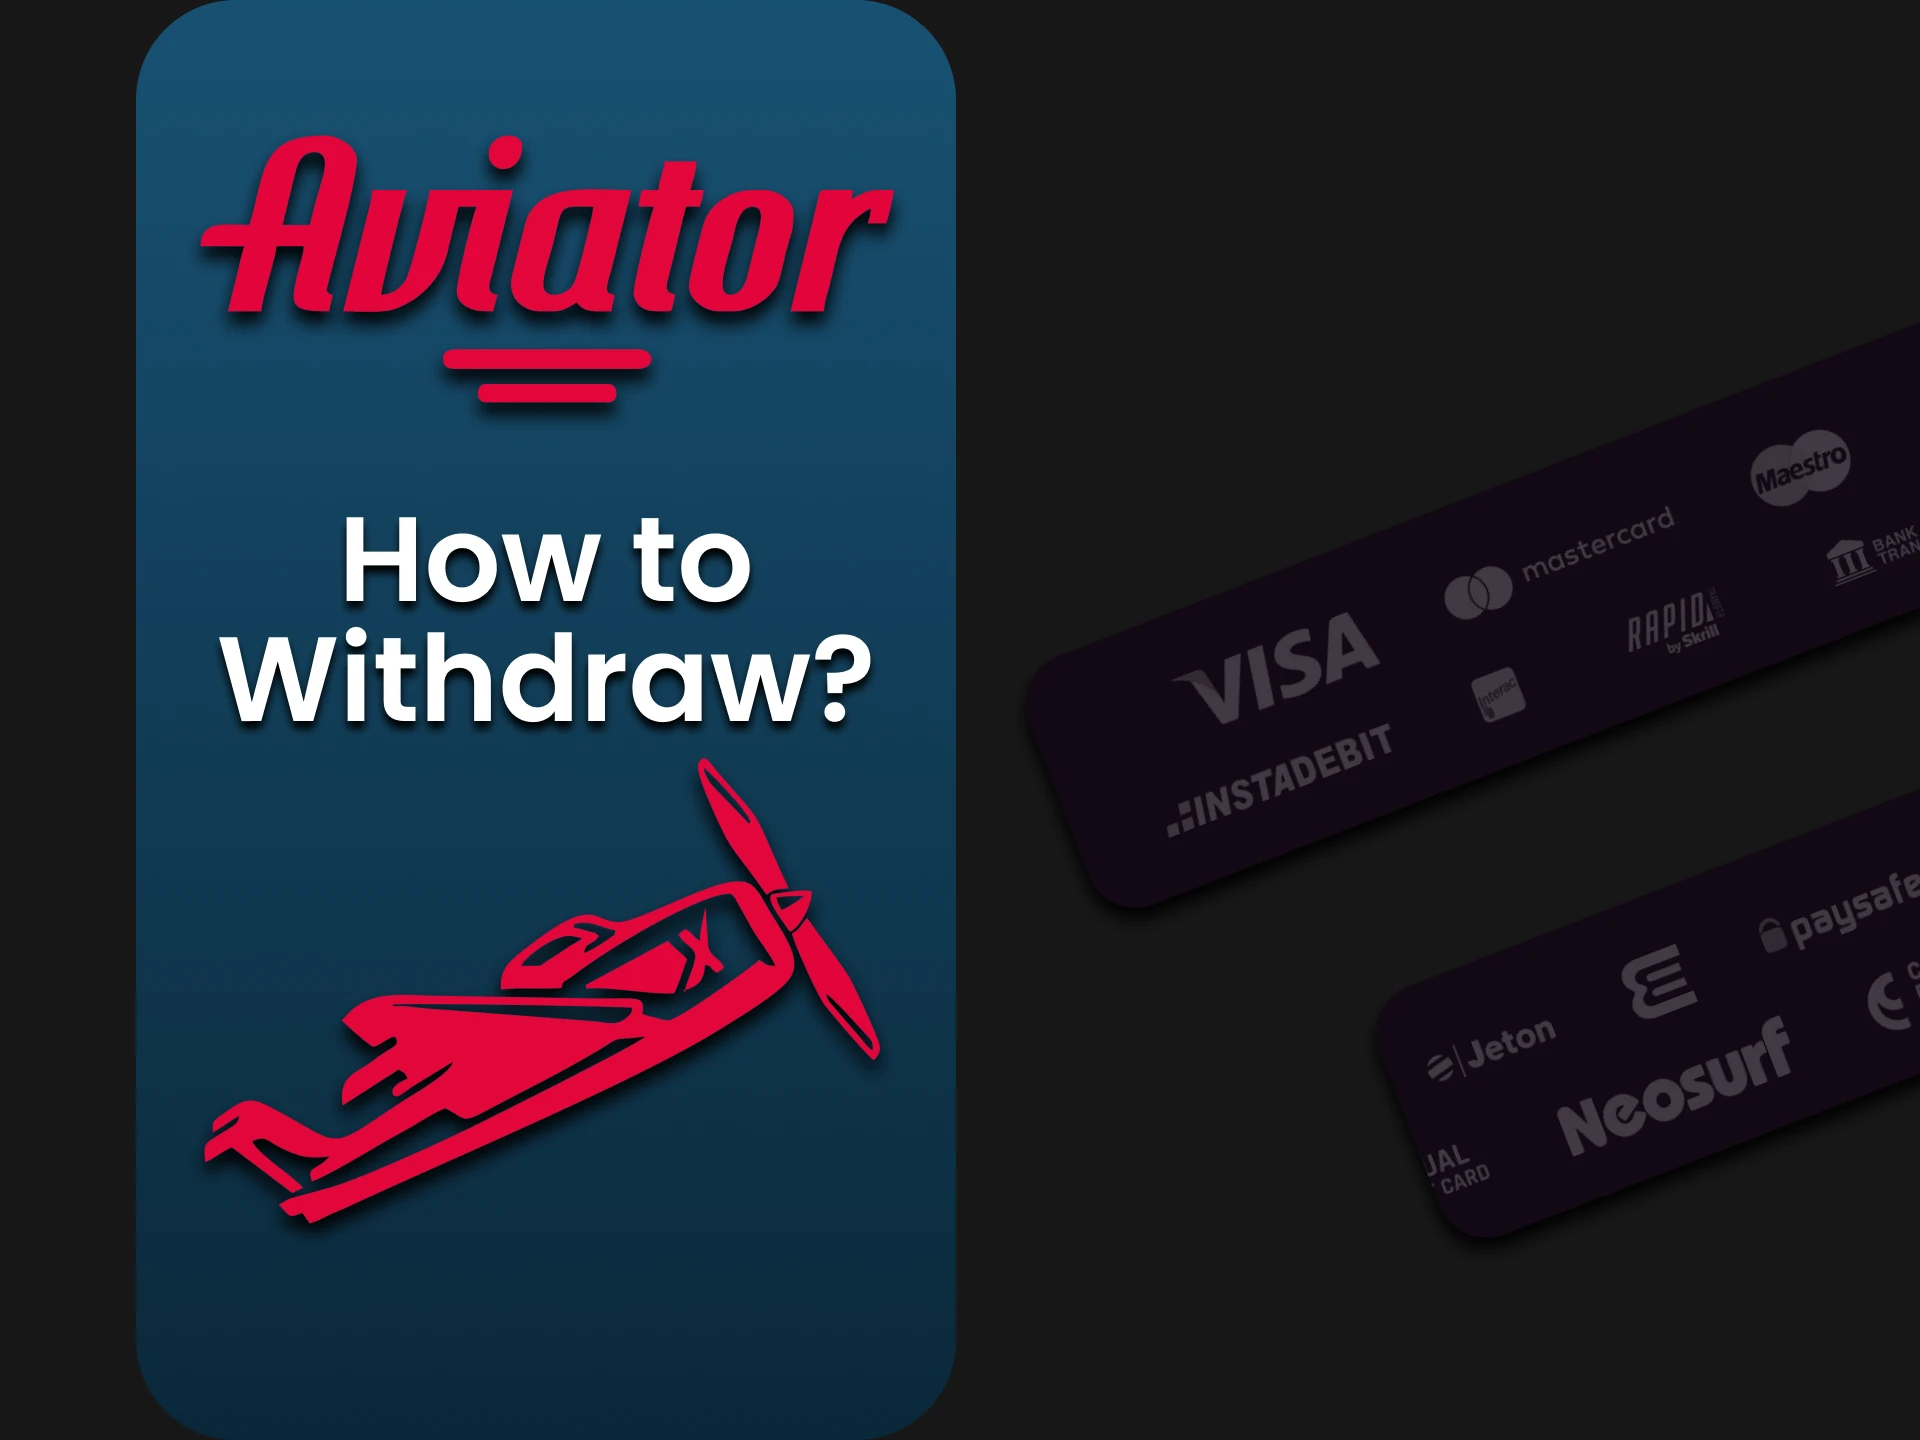 We will tell you how to withdraw funds in the Aviator game.